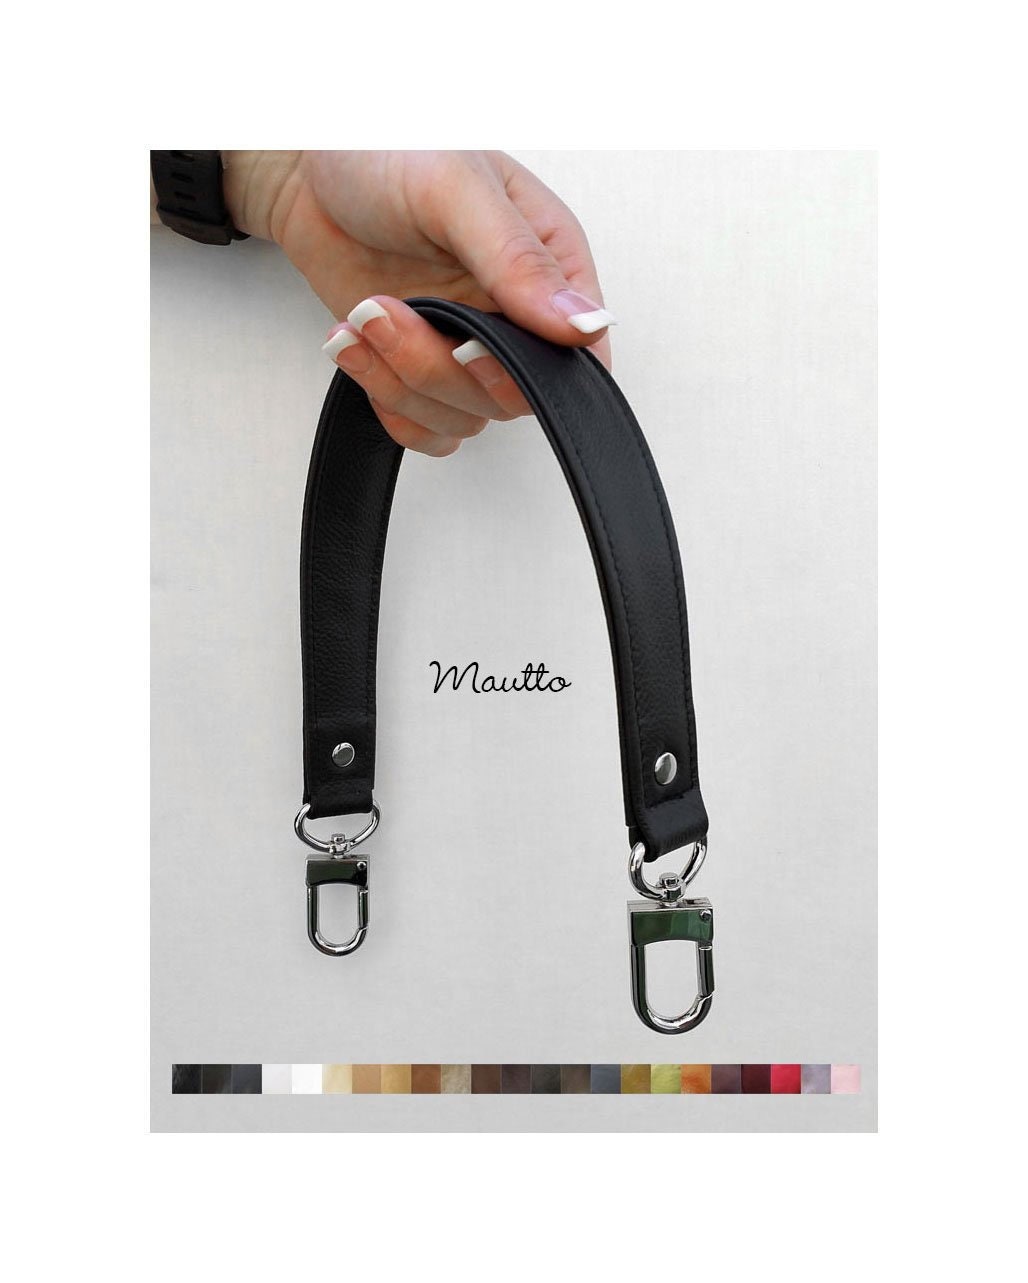 Purse/bag Strap Extender Leather 8 Length, .75 3/4 Inch Wide Choose Leather  Color & Hardware Style 